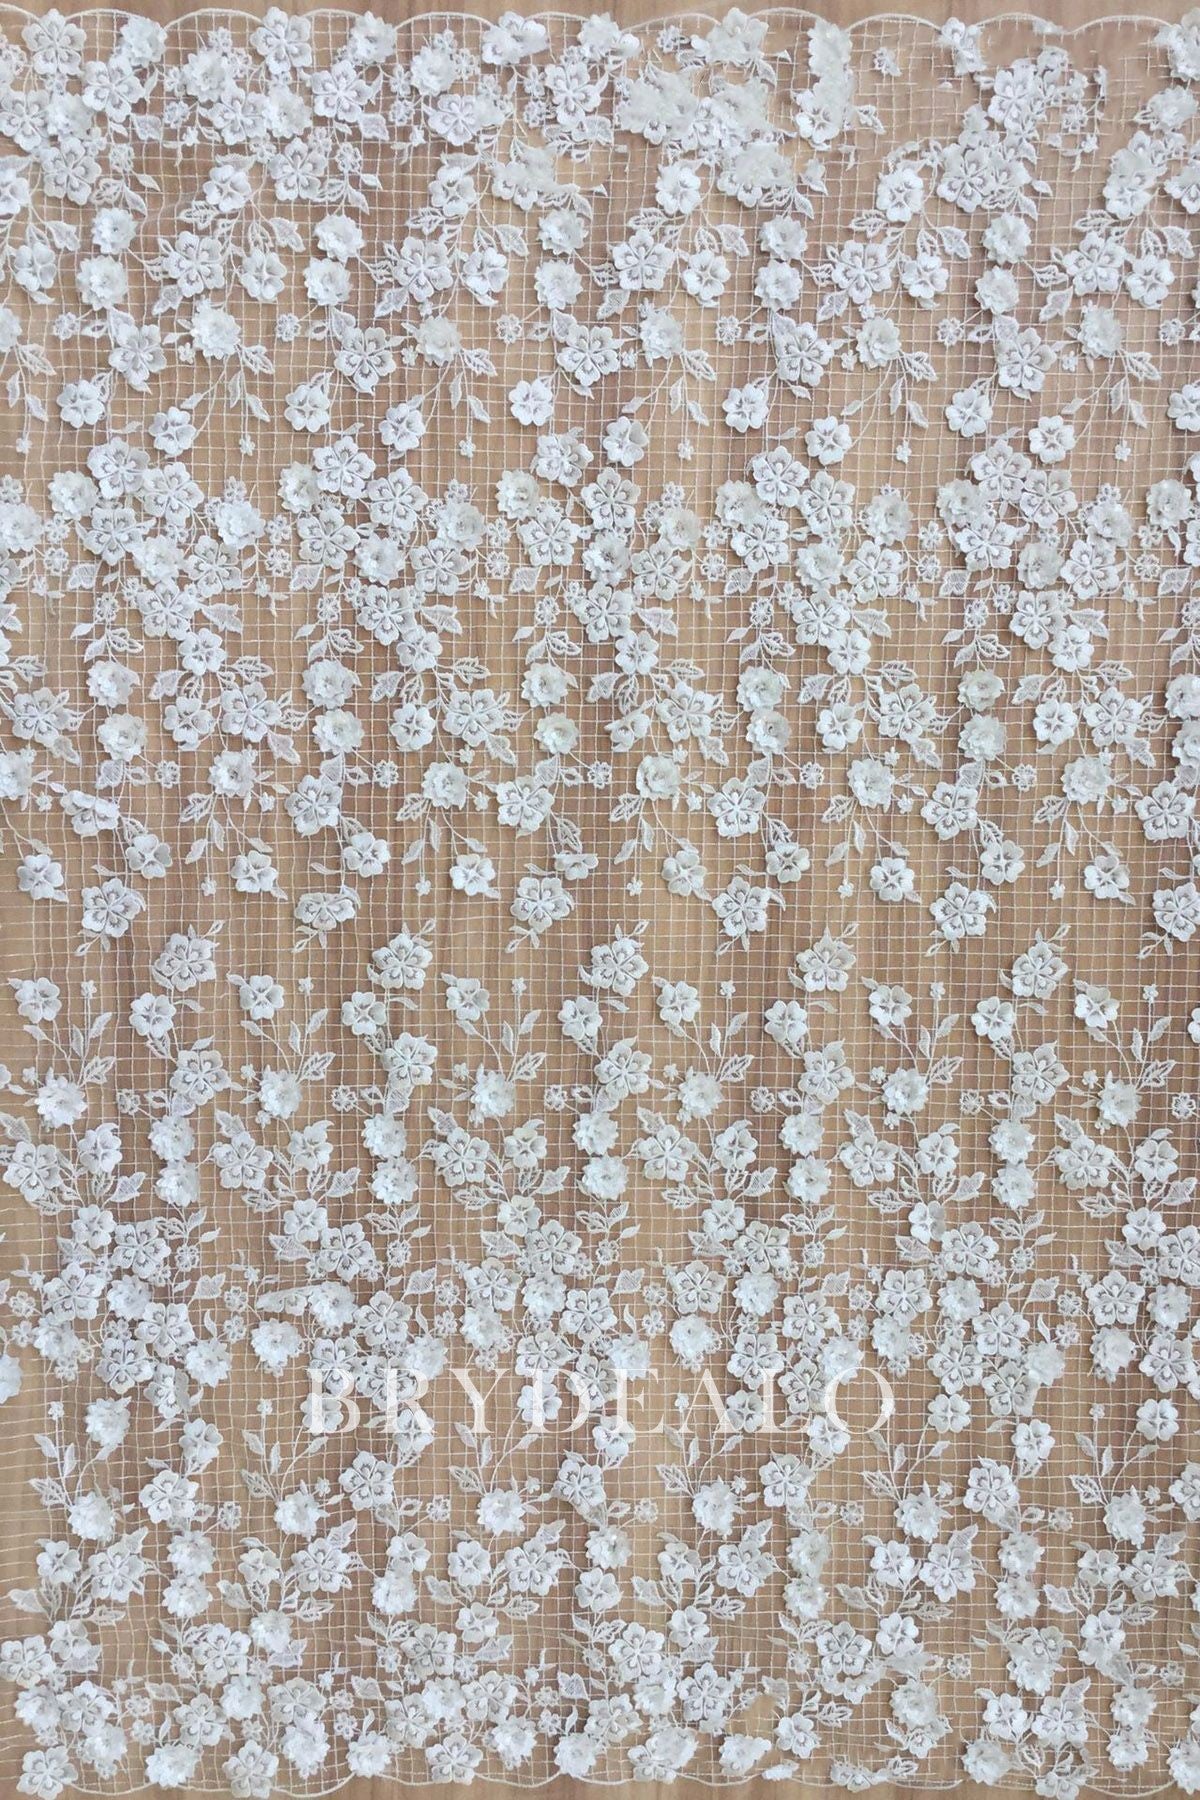 Wholesale 3D Flower Embroidery Lace Fabric